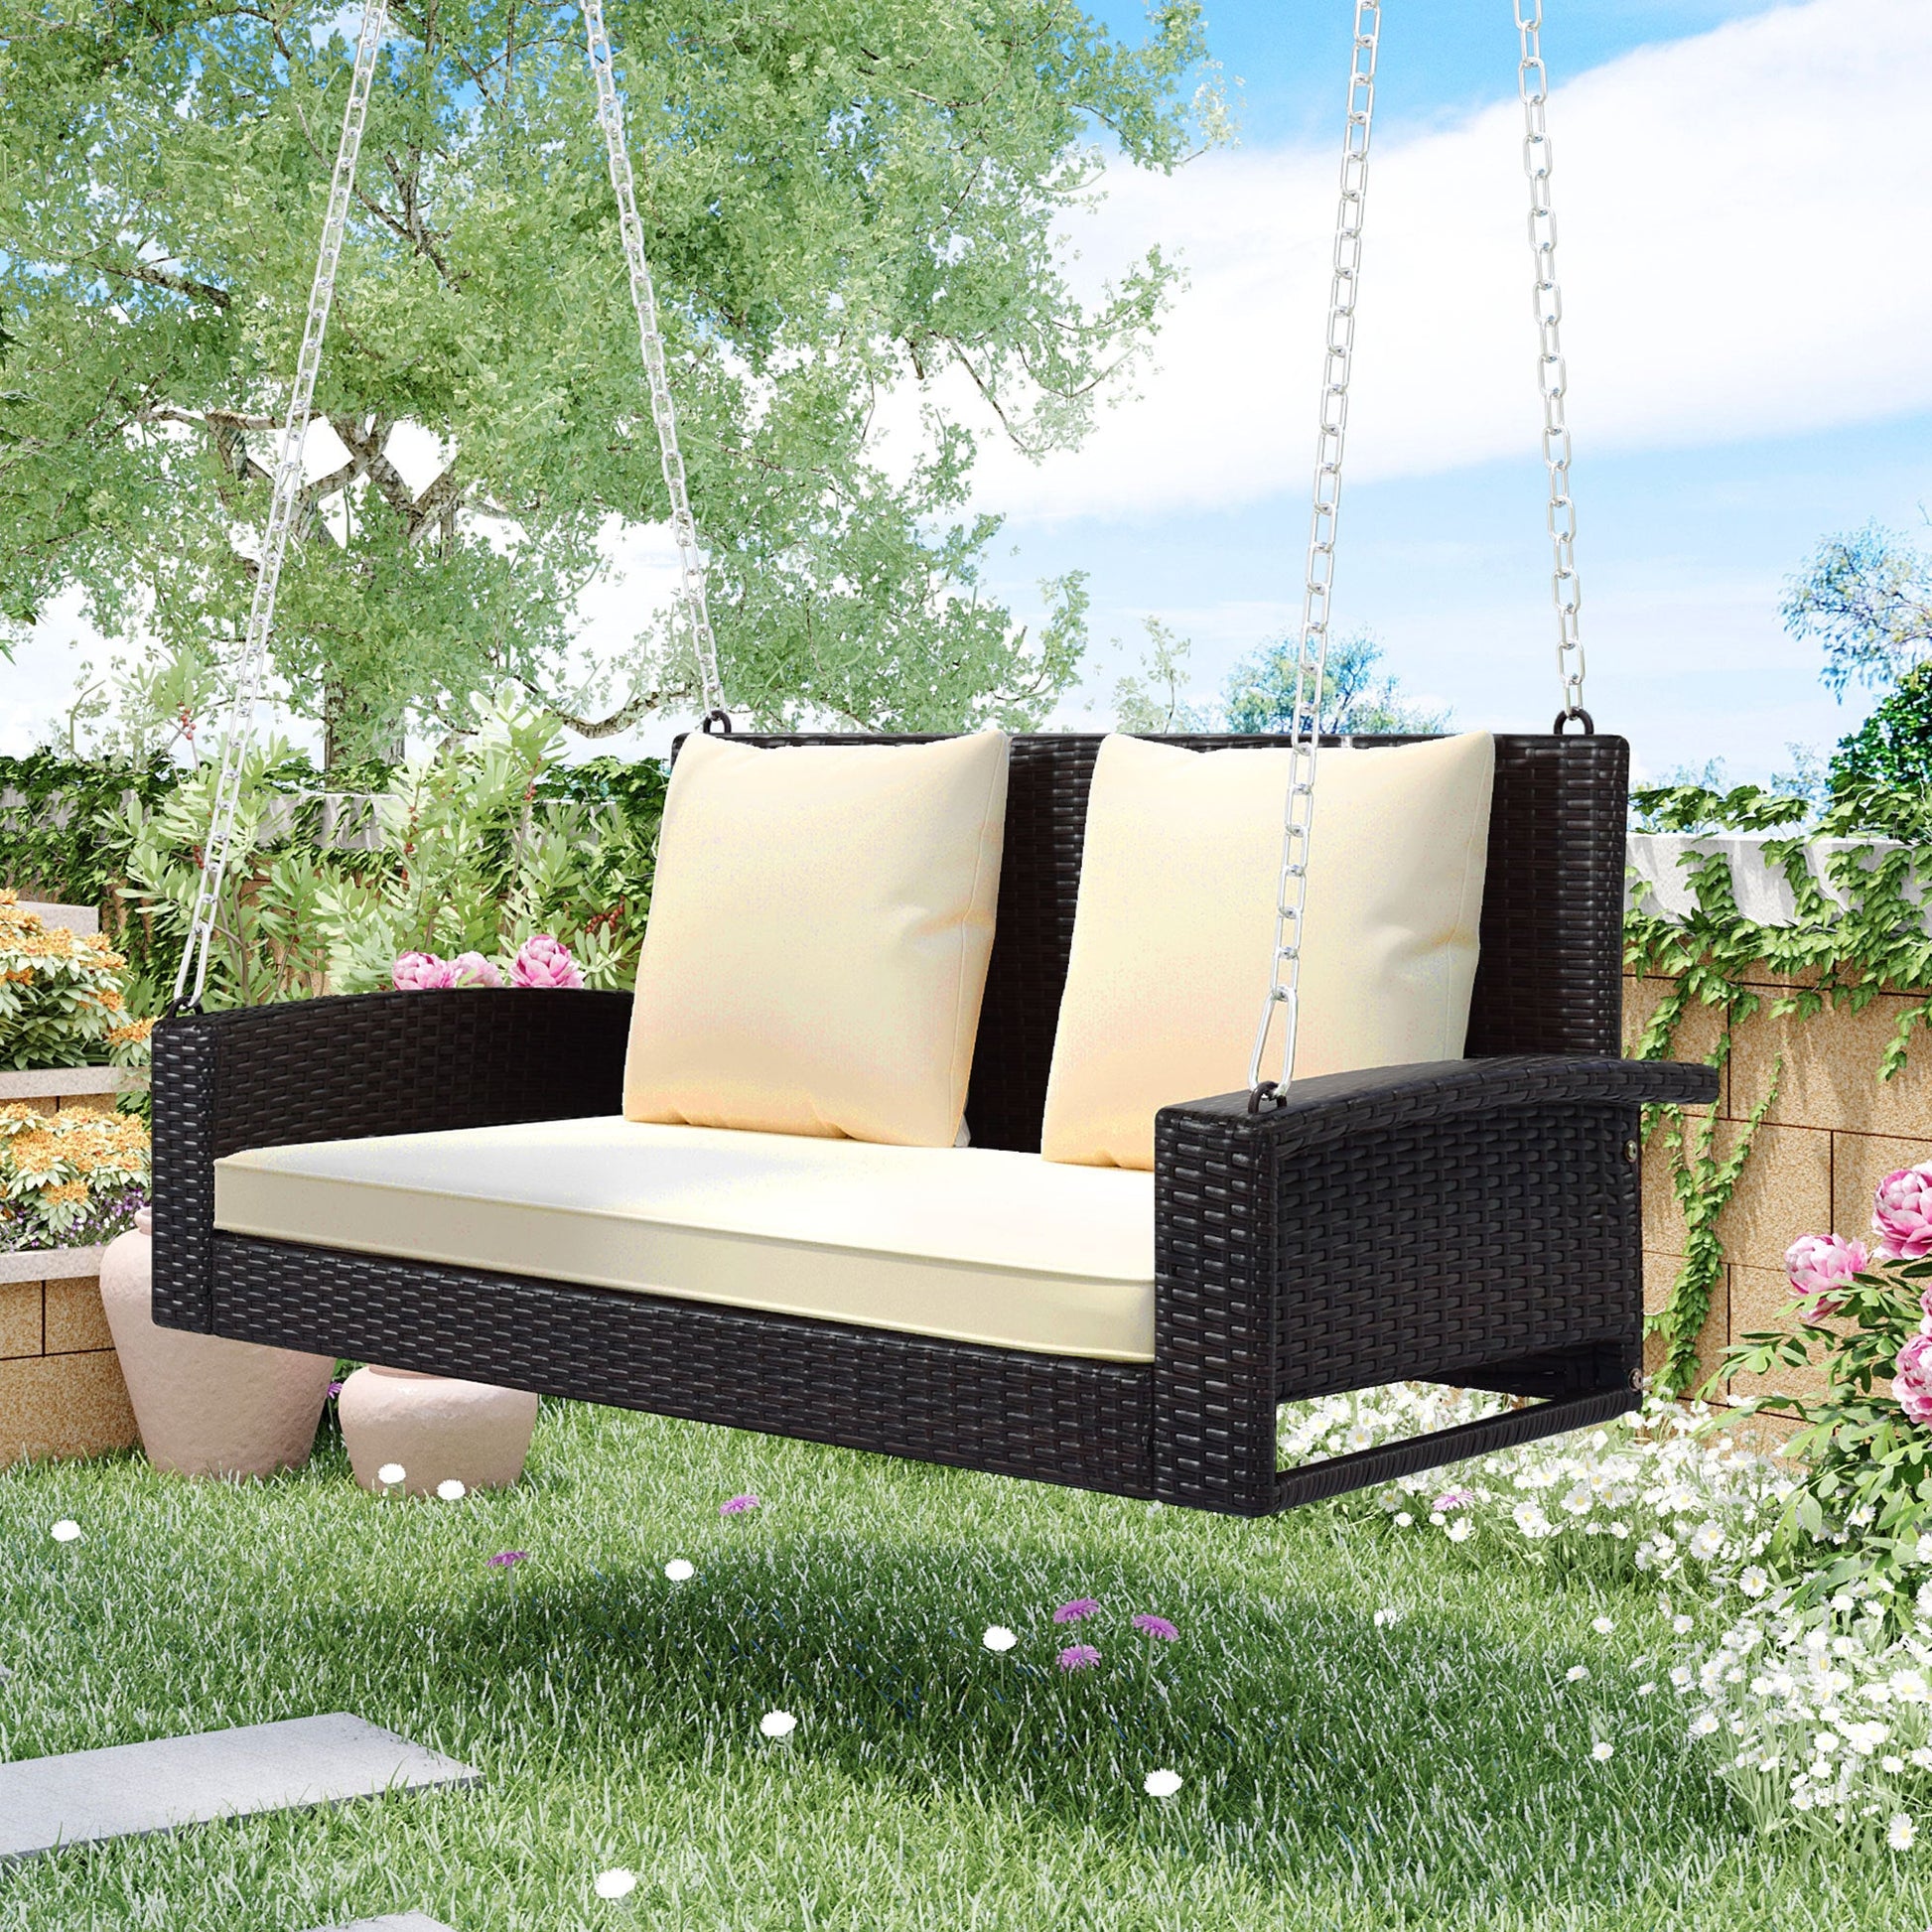 GO 2-Person Wicker Hanging Porch Swing with Chains, Cushion, Pillow, Rattan Swing Bench for Garden, Backyard, Pond. (Brown Wicker, Beige Cushion)-7